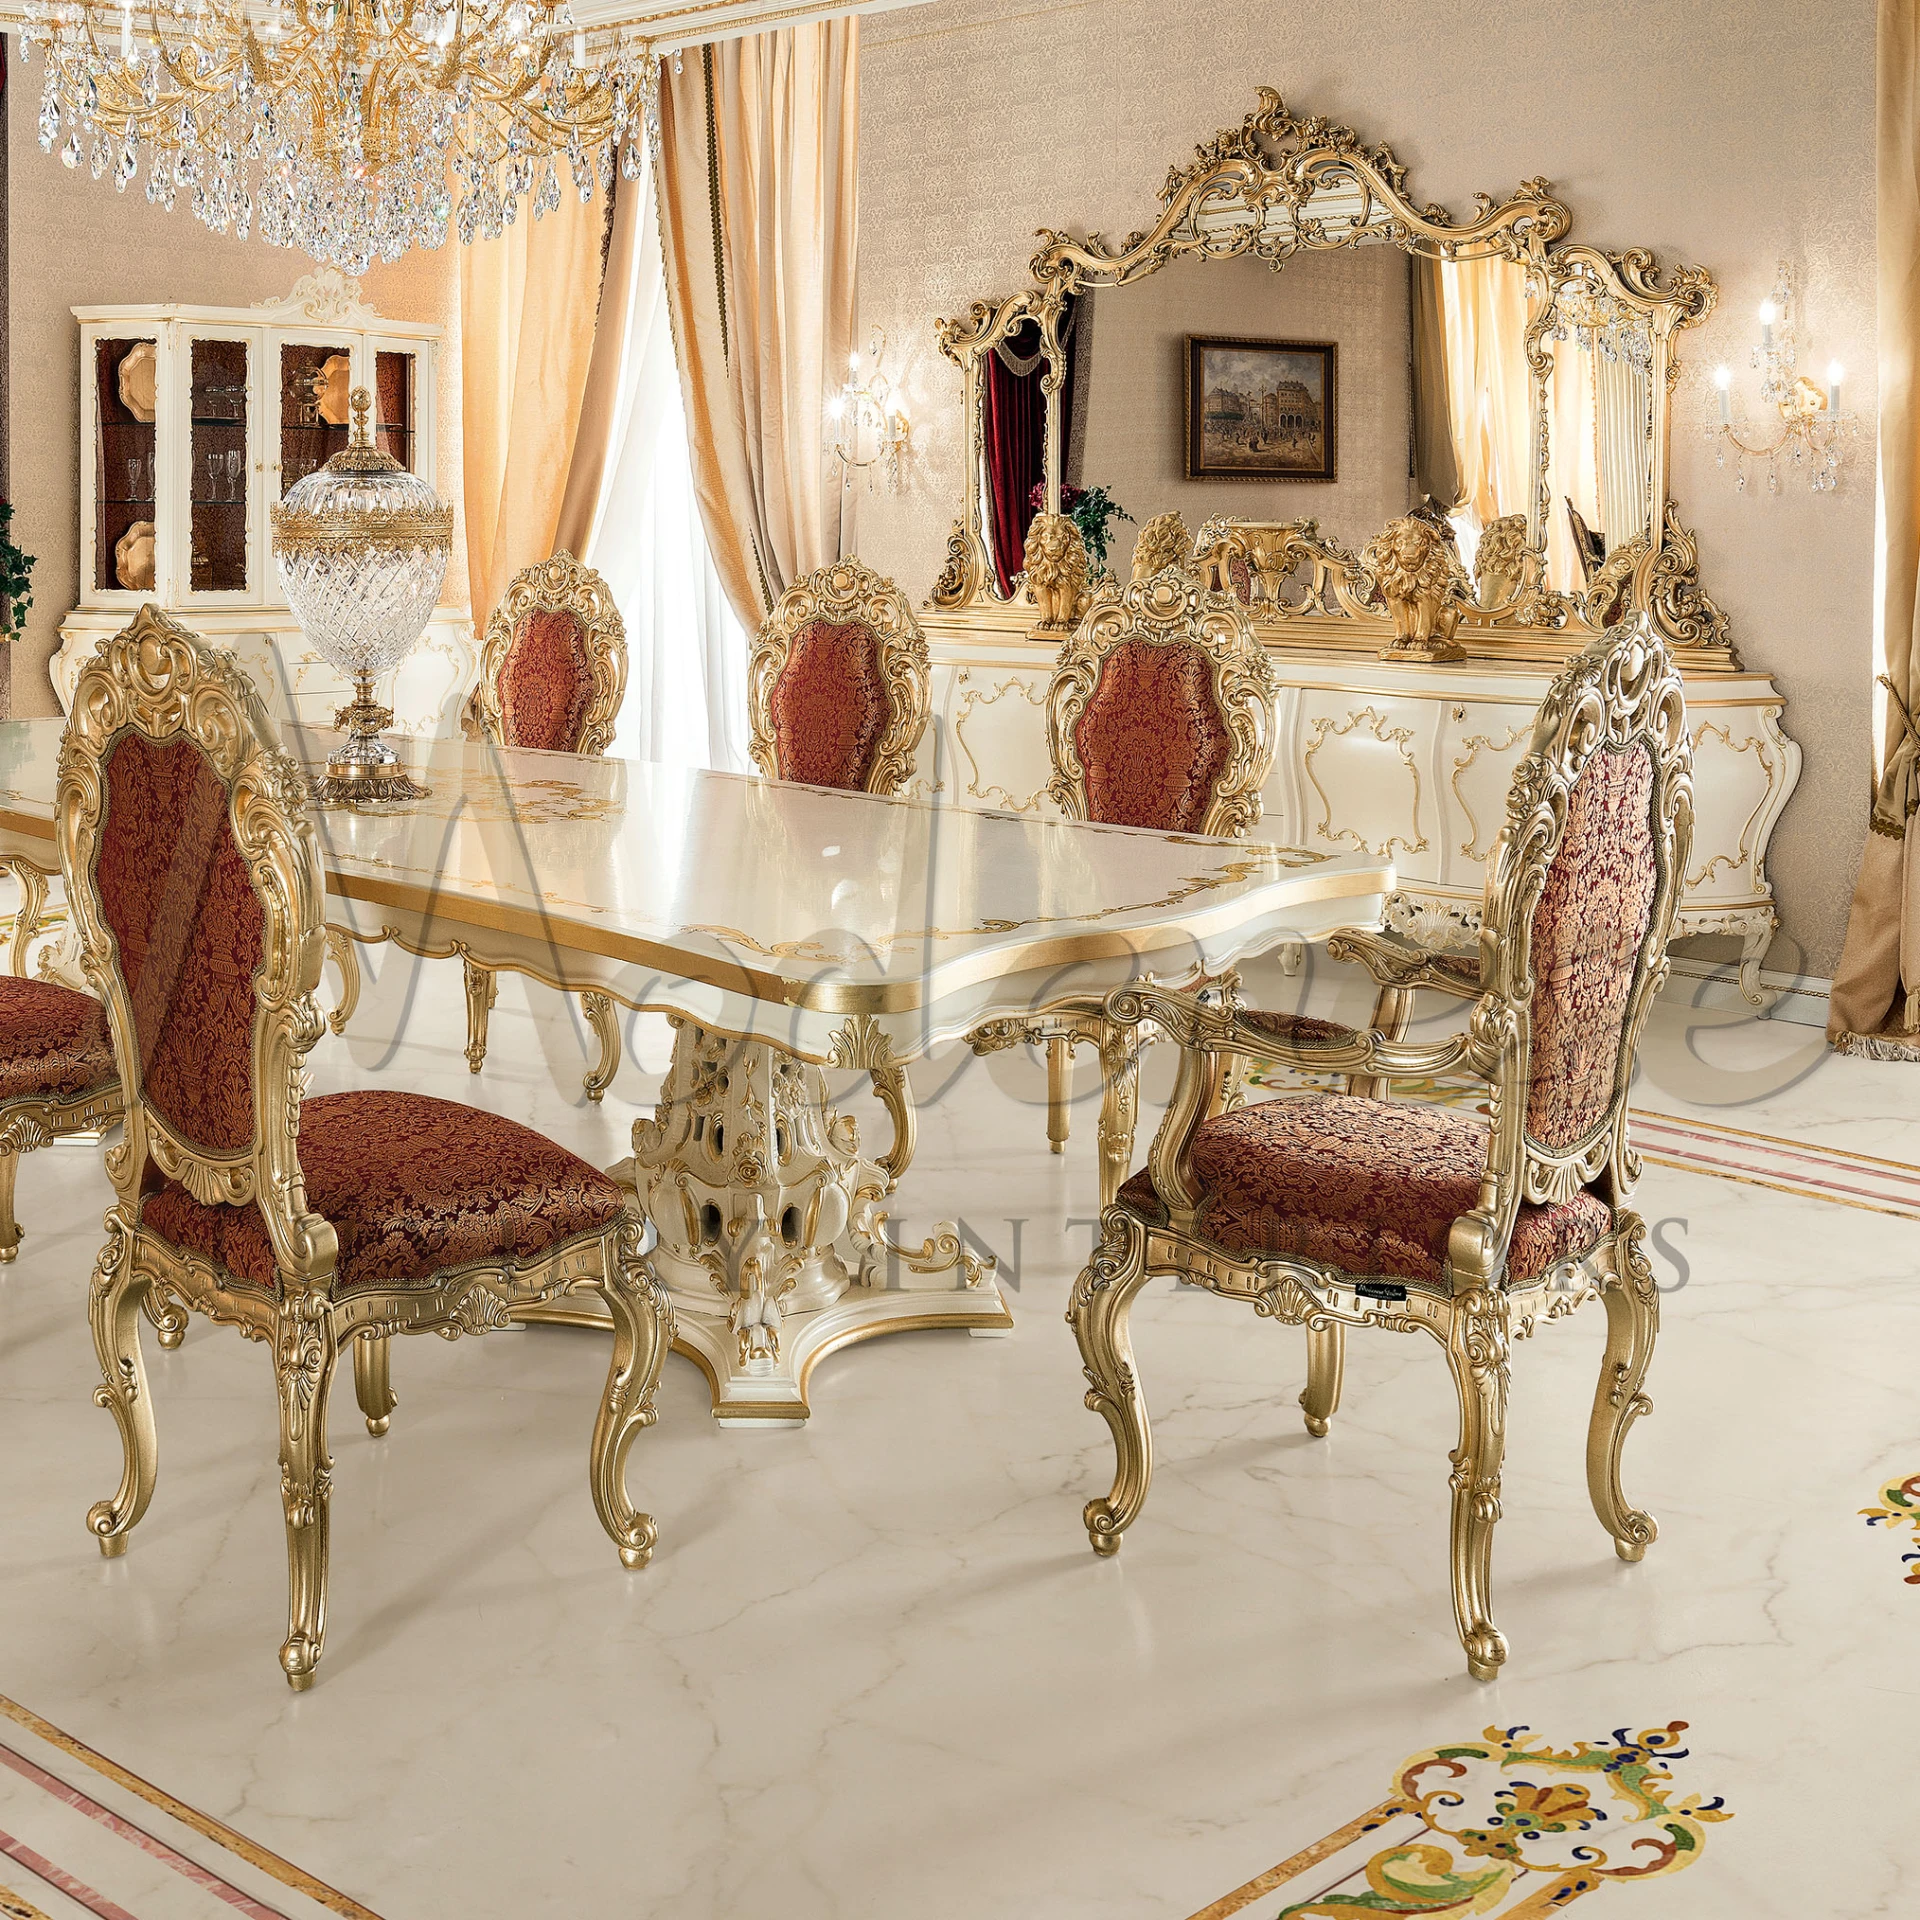 Discover your new mansion's ambiance with Modenese Interior's baroque masterpiece. Hand-carved, gold-leaf adorned, patterned upholstery for monarchic allure.